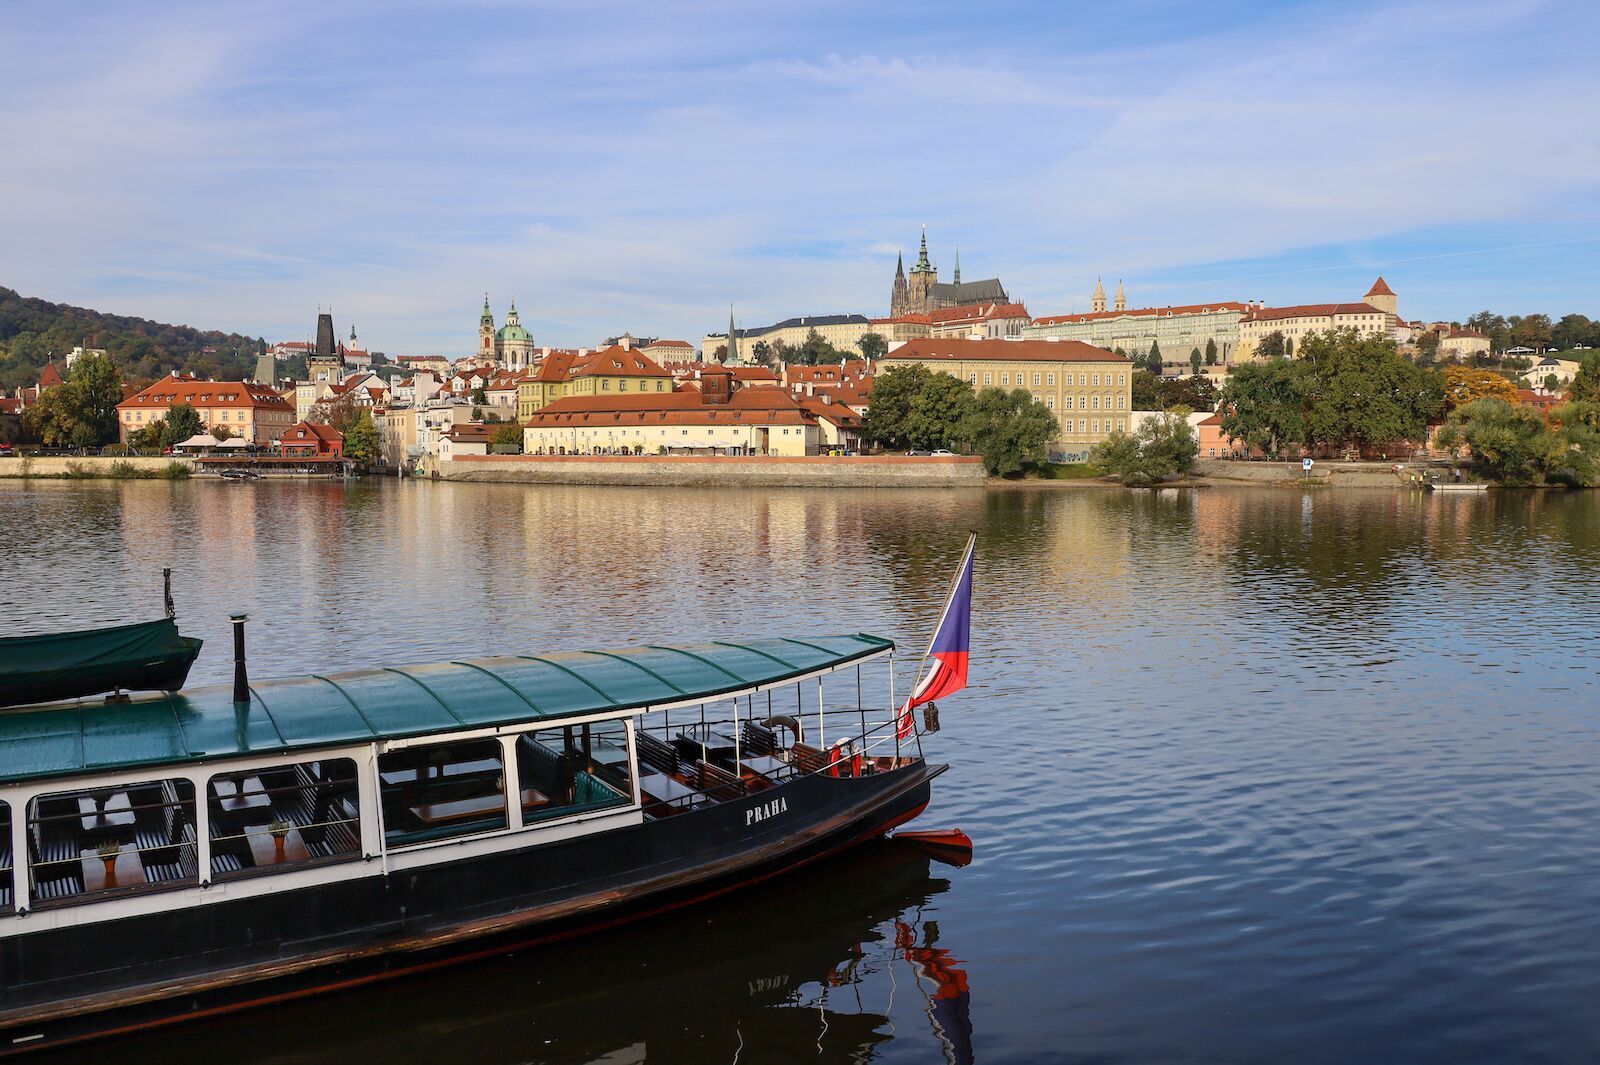 things to do in prague include walking across the Charles Bridge